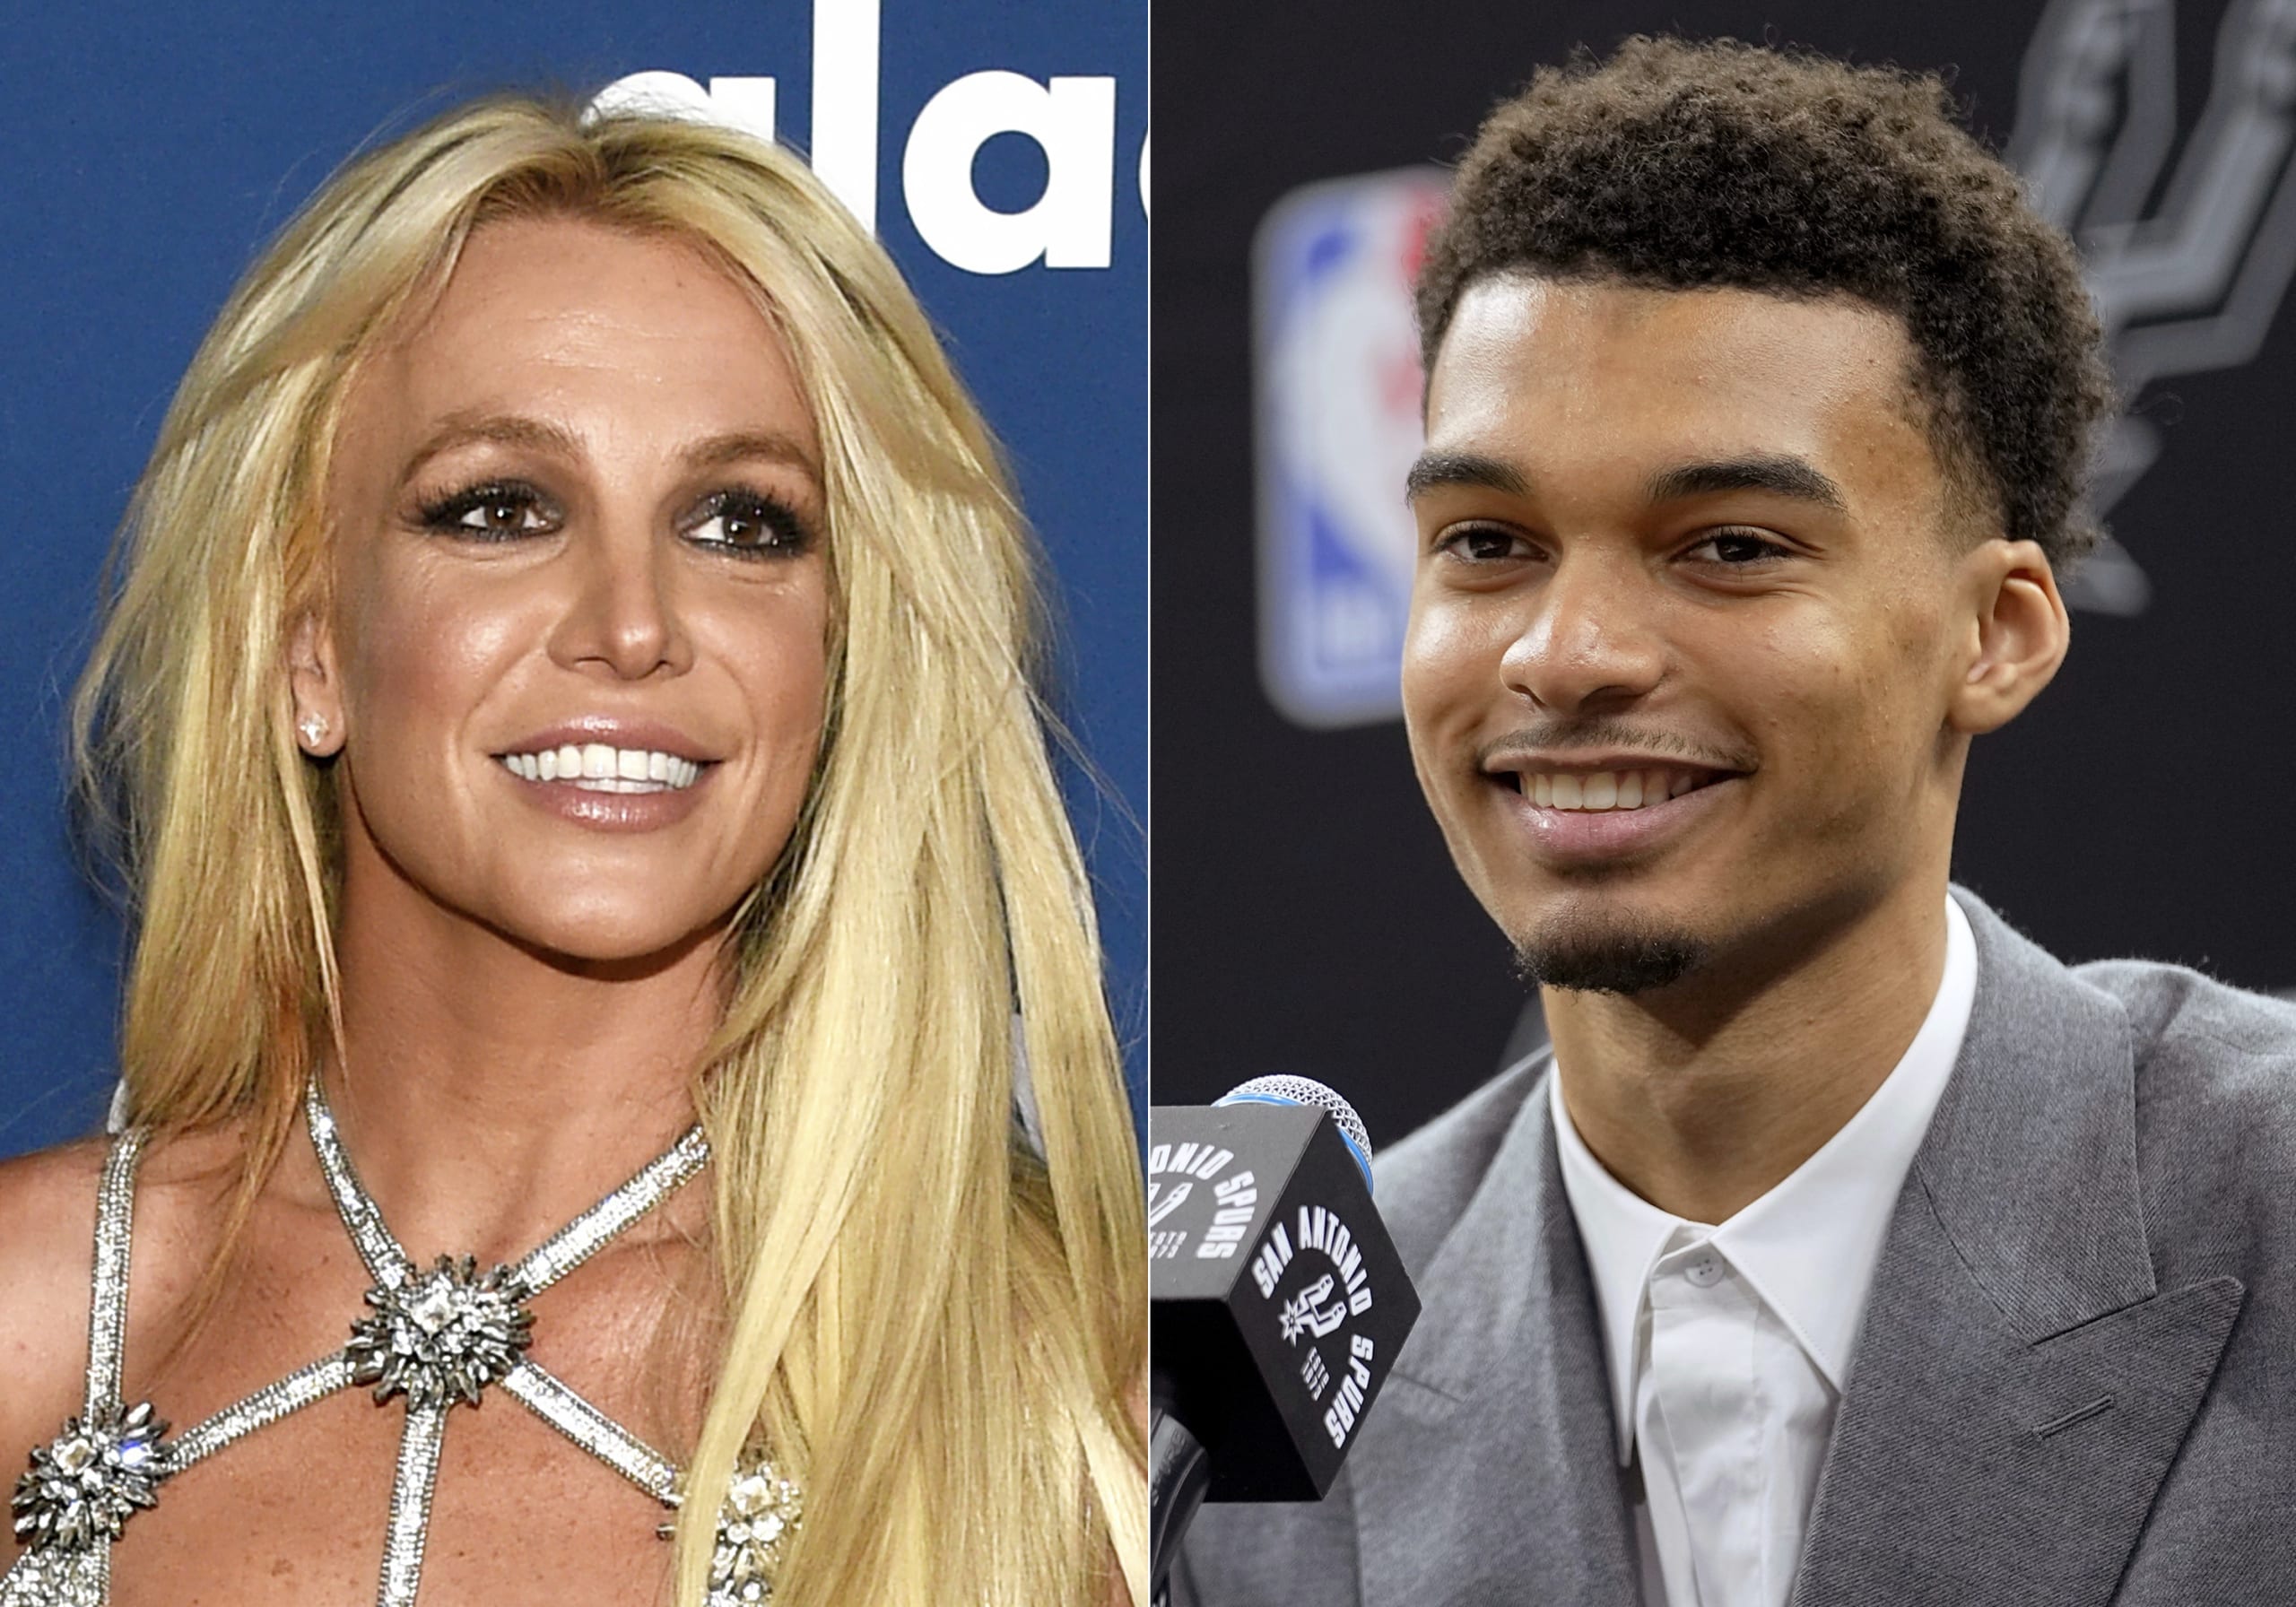 Spurs Victor Wembanyama says Britney Spears grabbed him. She denies it. No charges filed